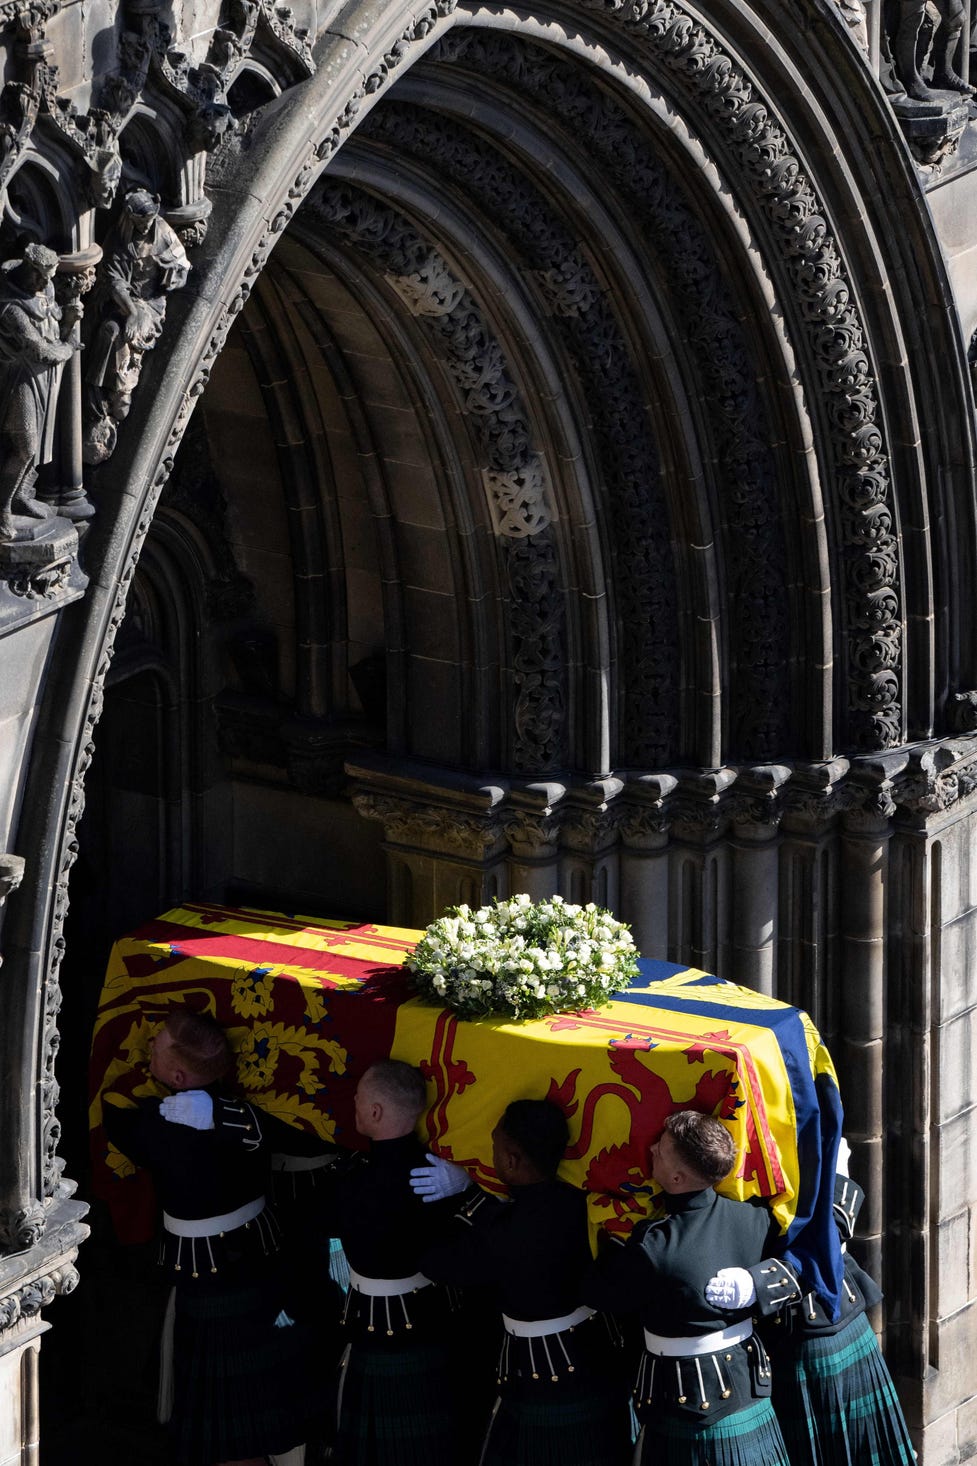 Touching Moments From The State Funeral of QUEEN ELIZABETH II